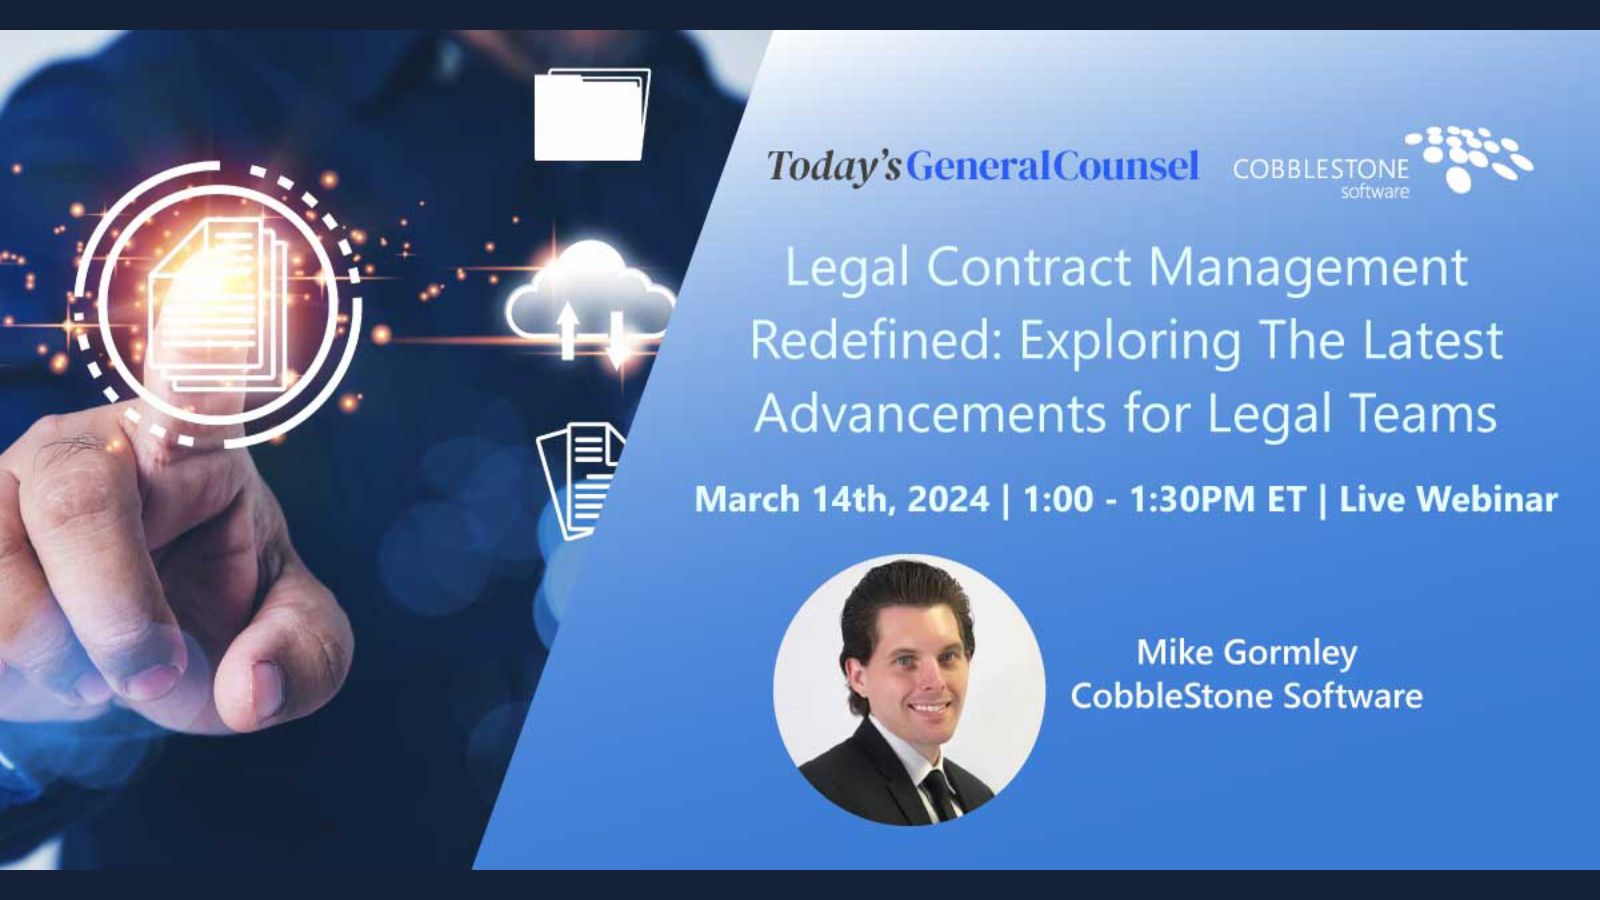 Today's General Counsel Webinar Sponsored by CobbleStone